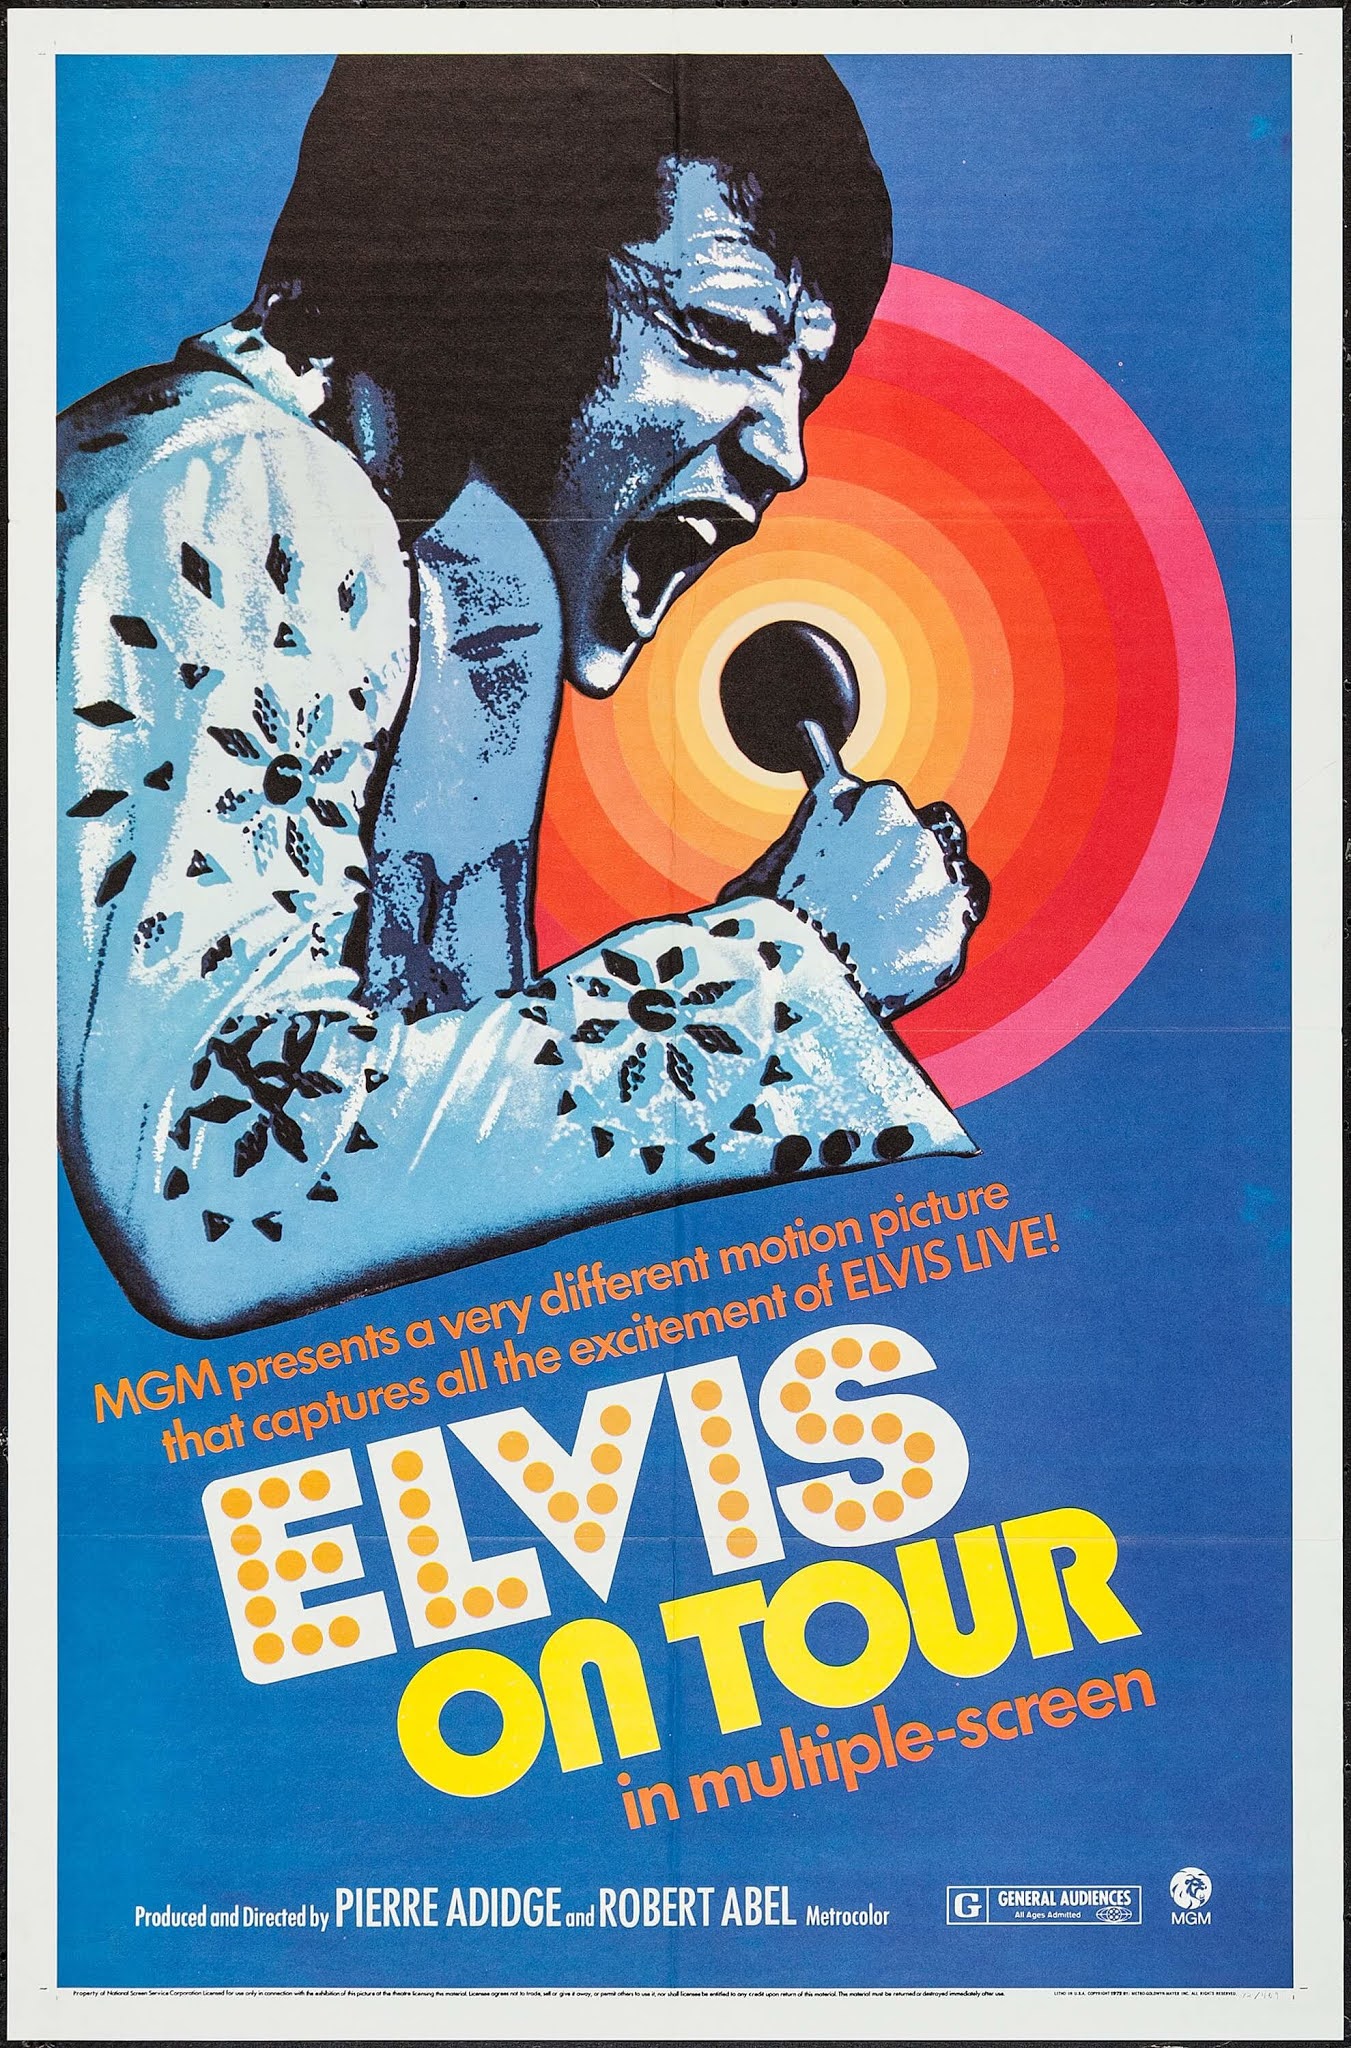 Elvis Day By Day: June 10 - On Tour, Astrodome and Matrix Box-sets
